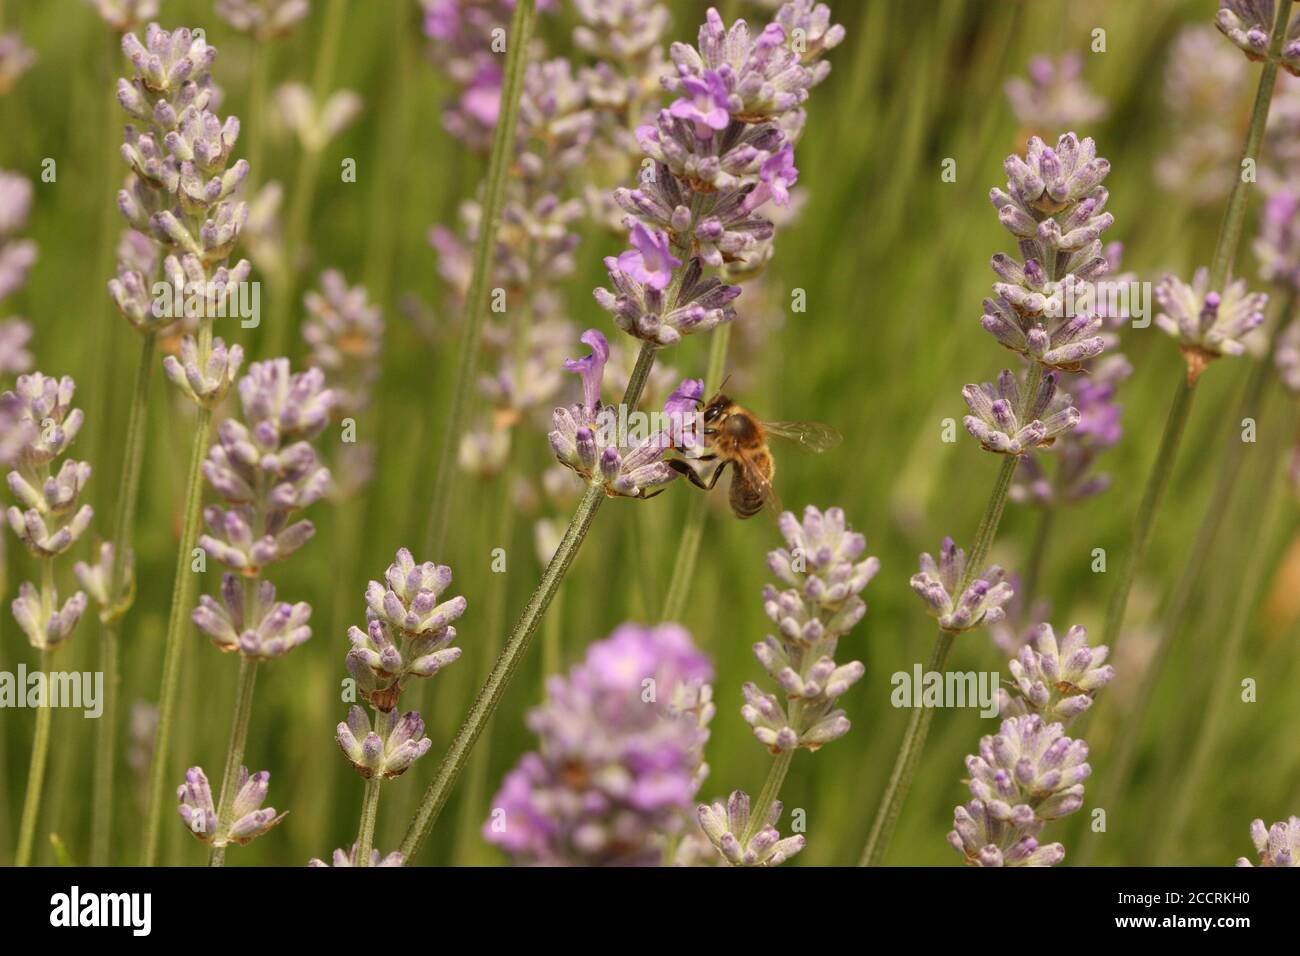 Honey bee collecting nectar from lavender flower, Oxford, England, UK Stock Photo